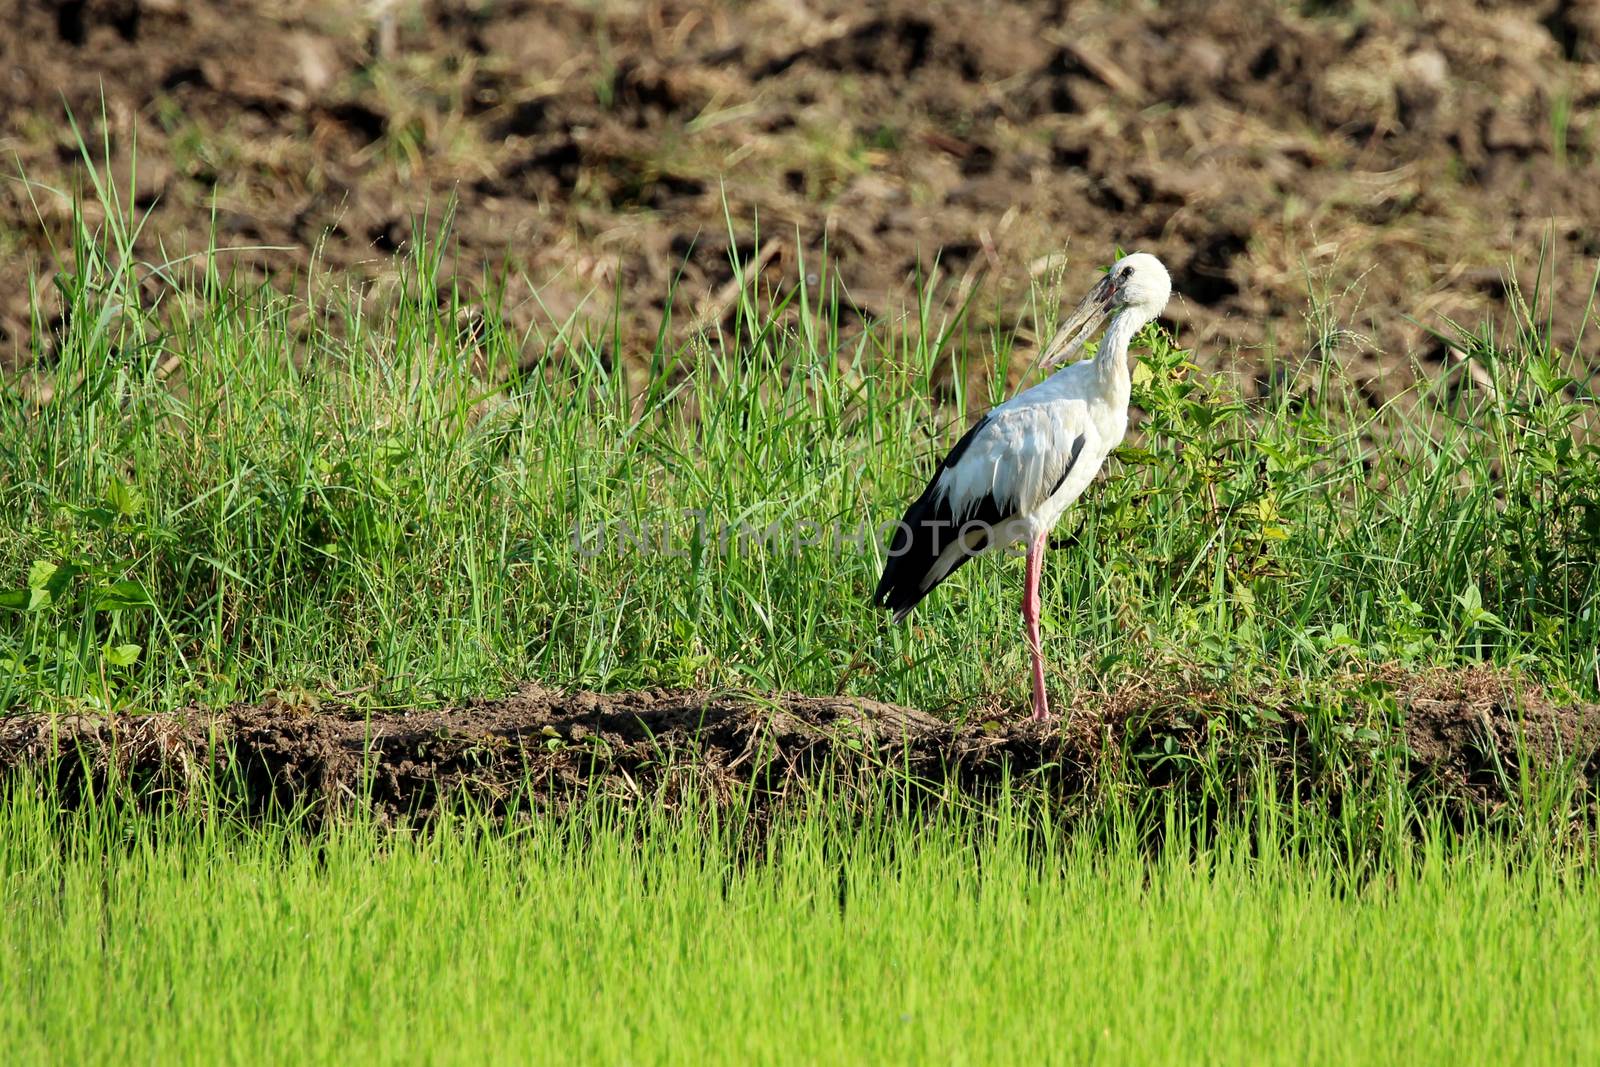 Image of stork on nature background by yod67